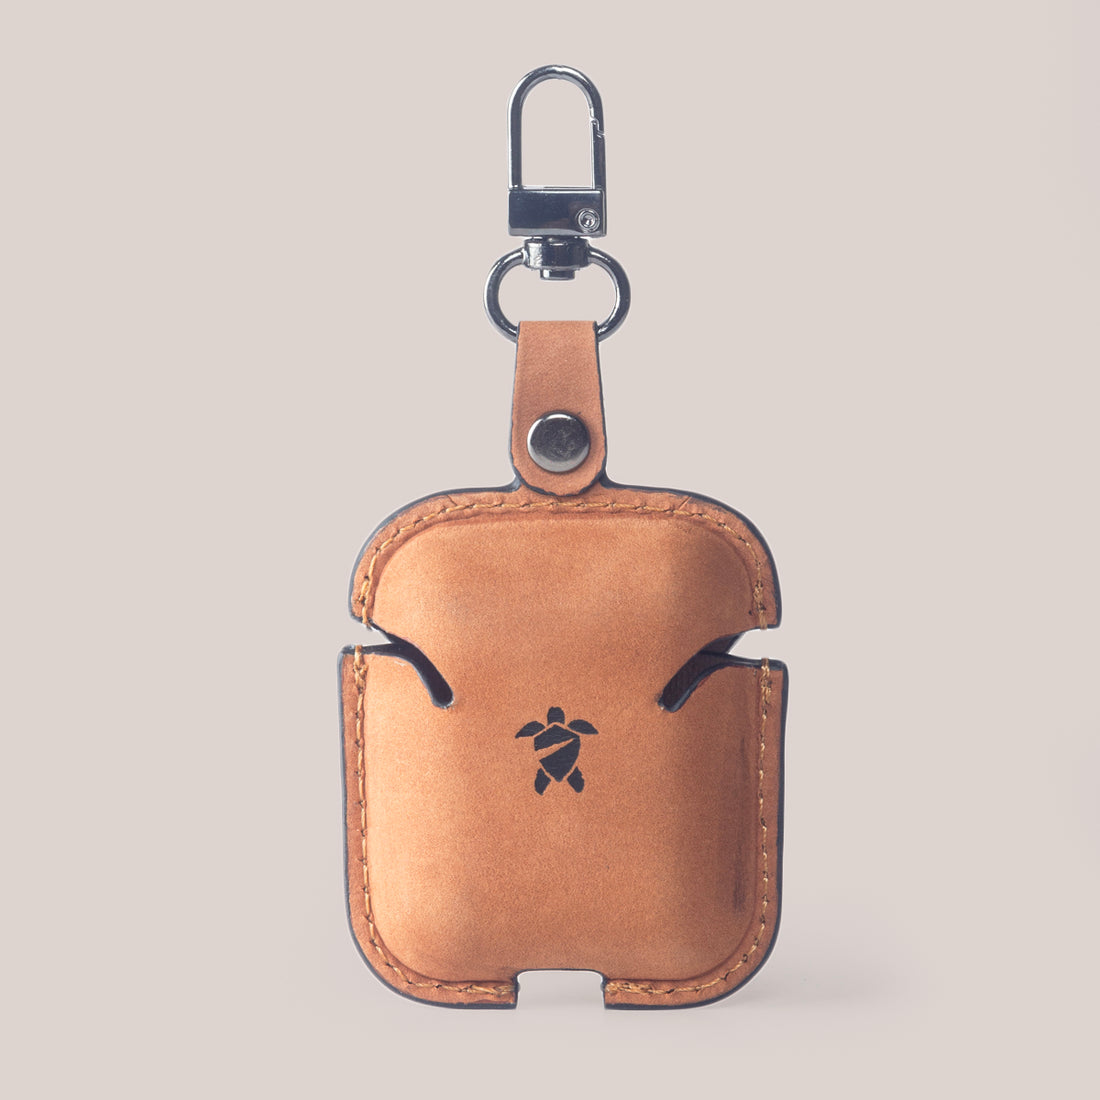 Leather AirPods 1, AirPods 2 Case - Vintage Tan